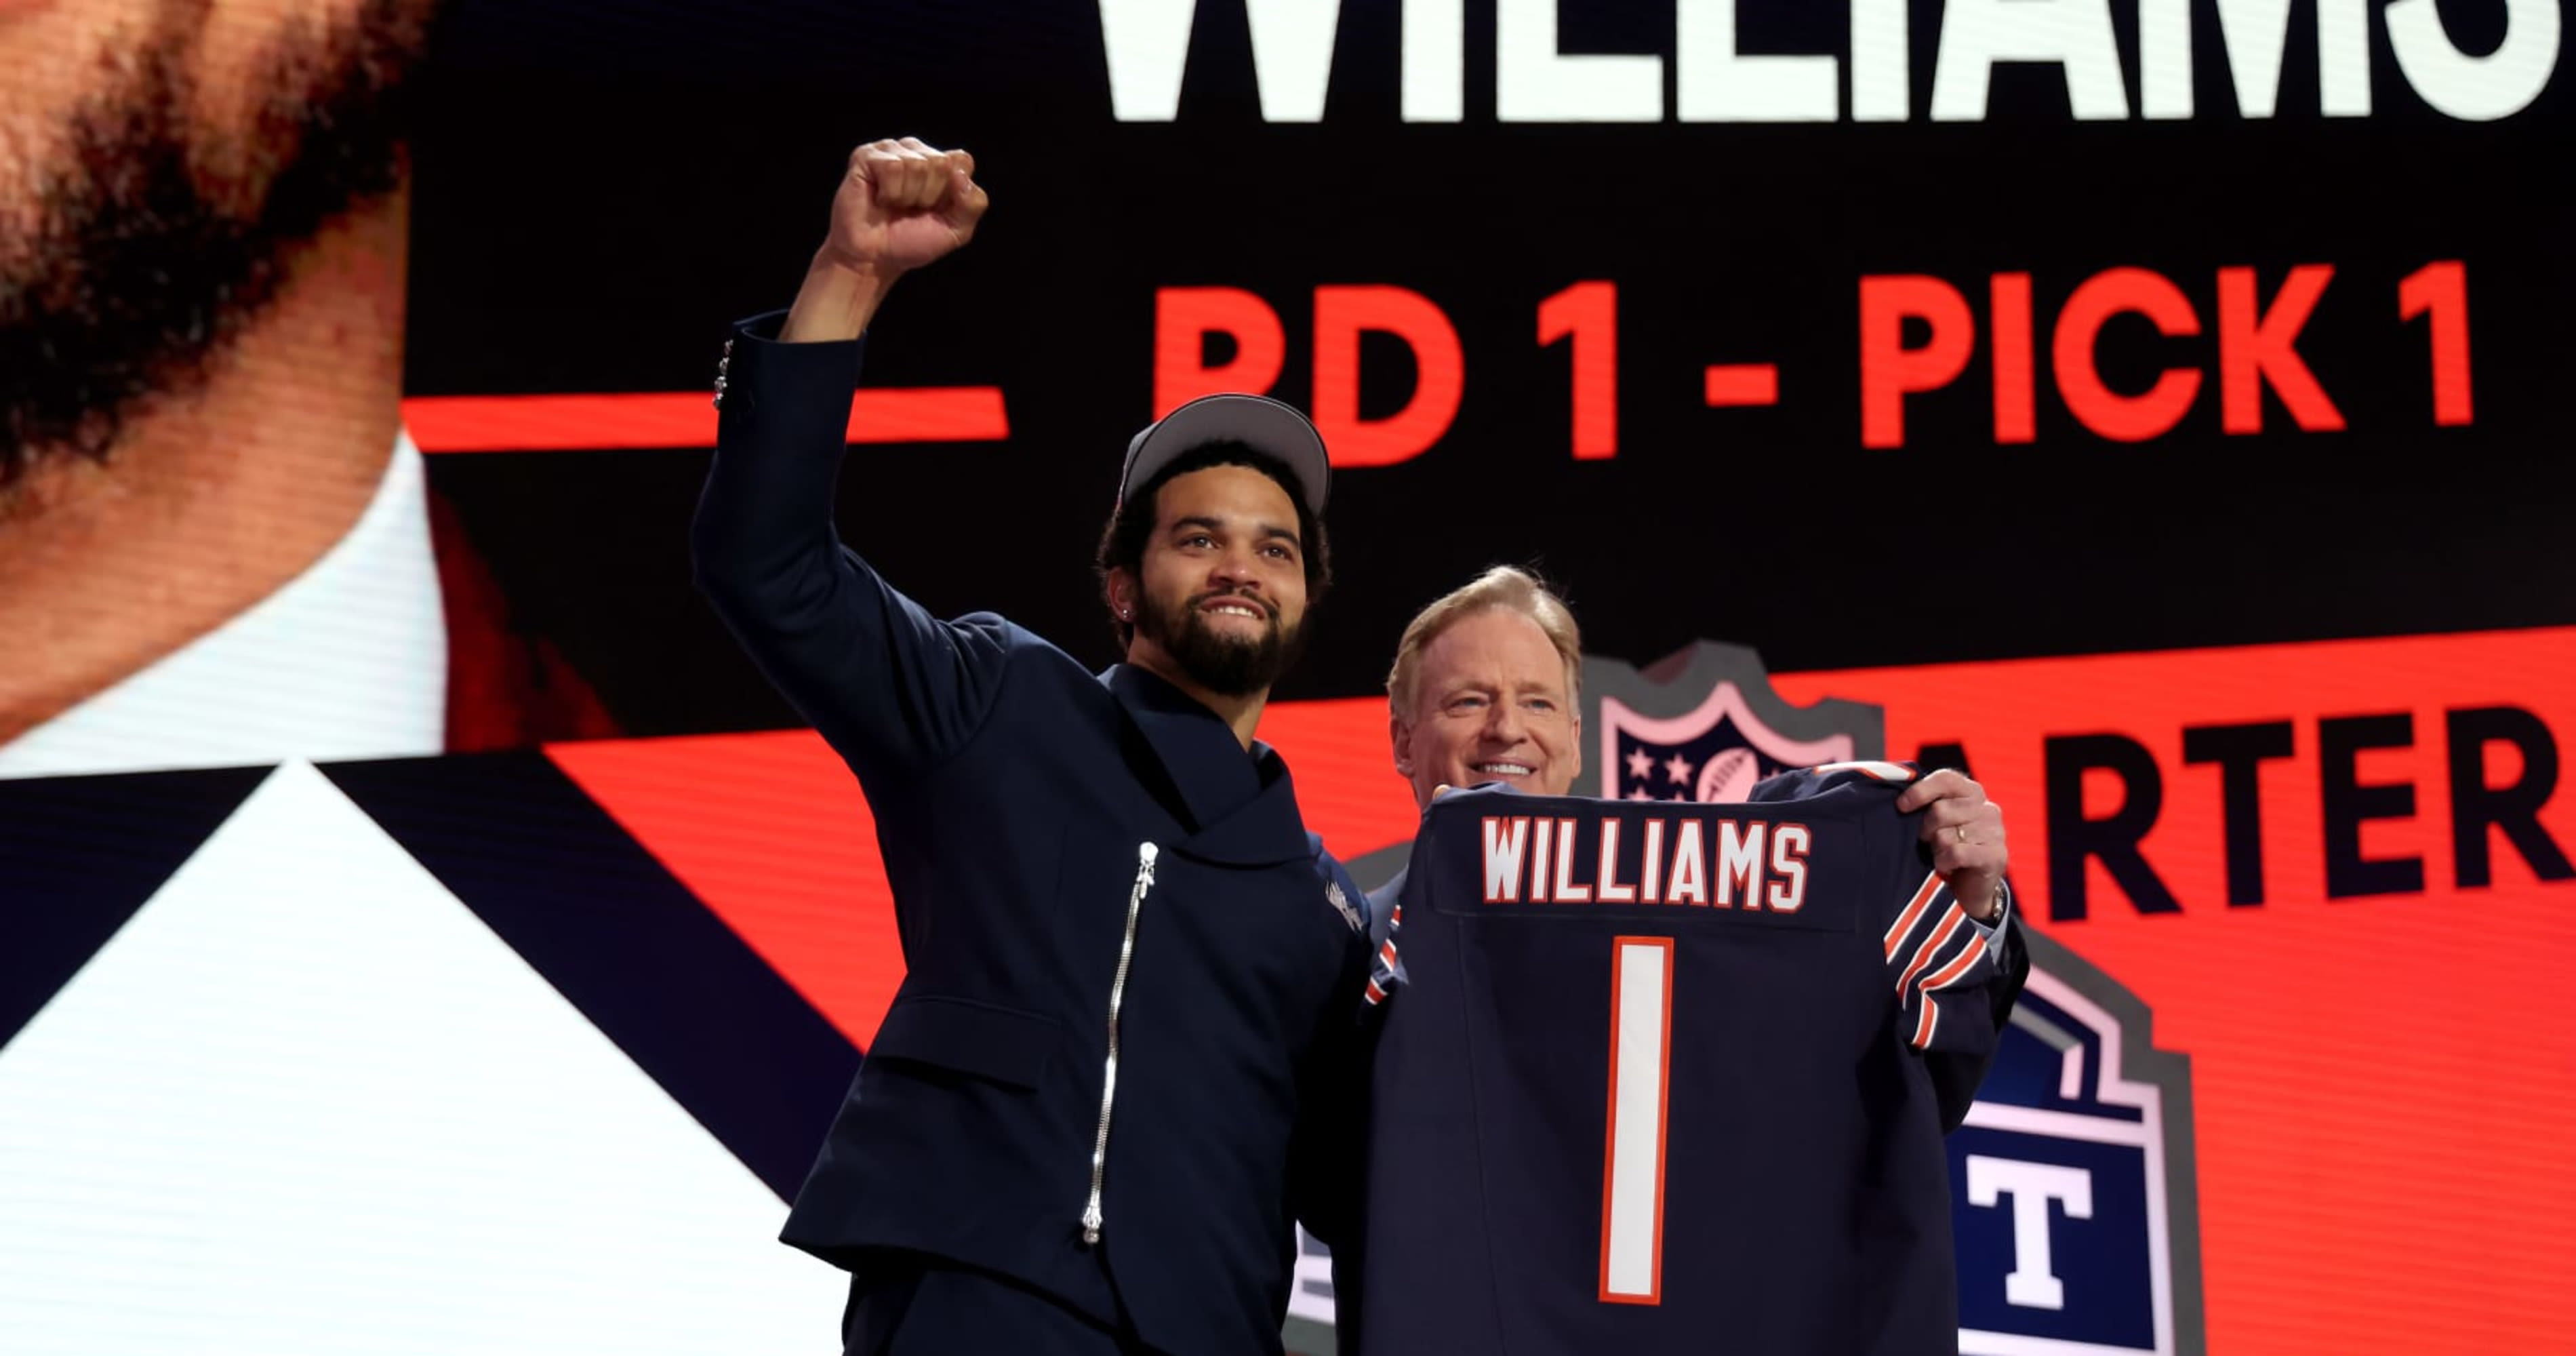 Video: Caleb Williams Reacts to Being Drafted by Bears No. 1, 'I Care About Winning'